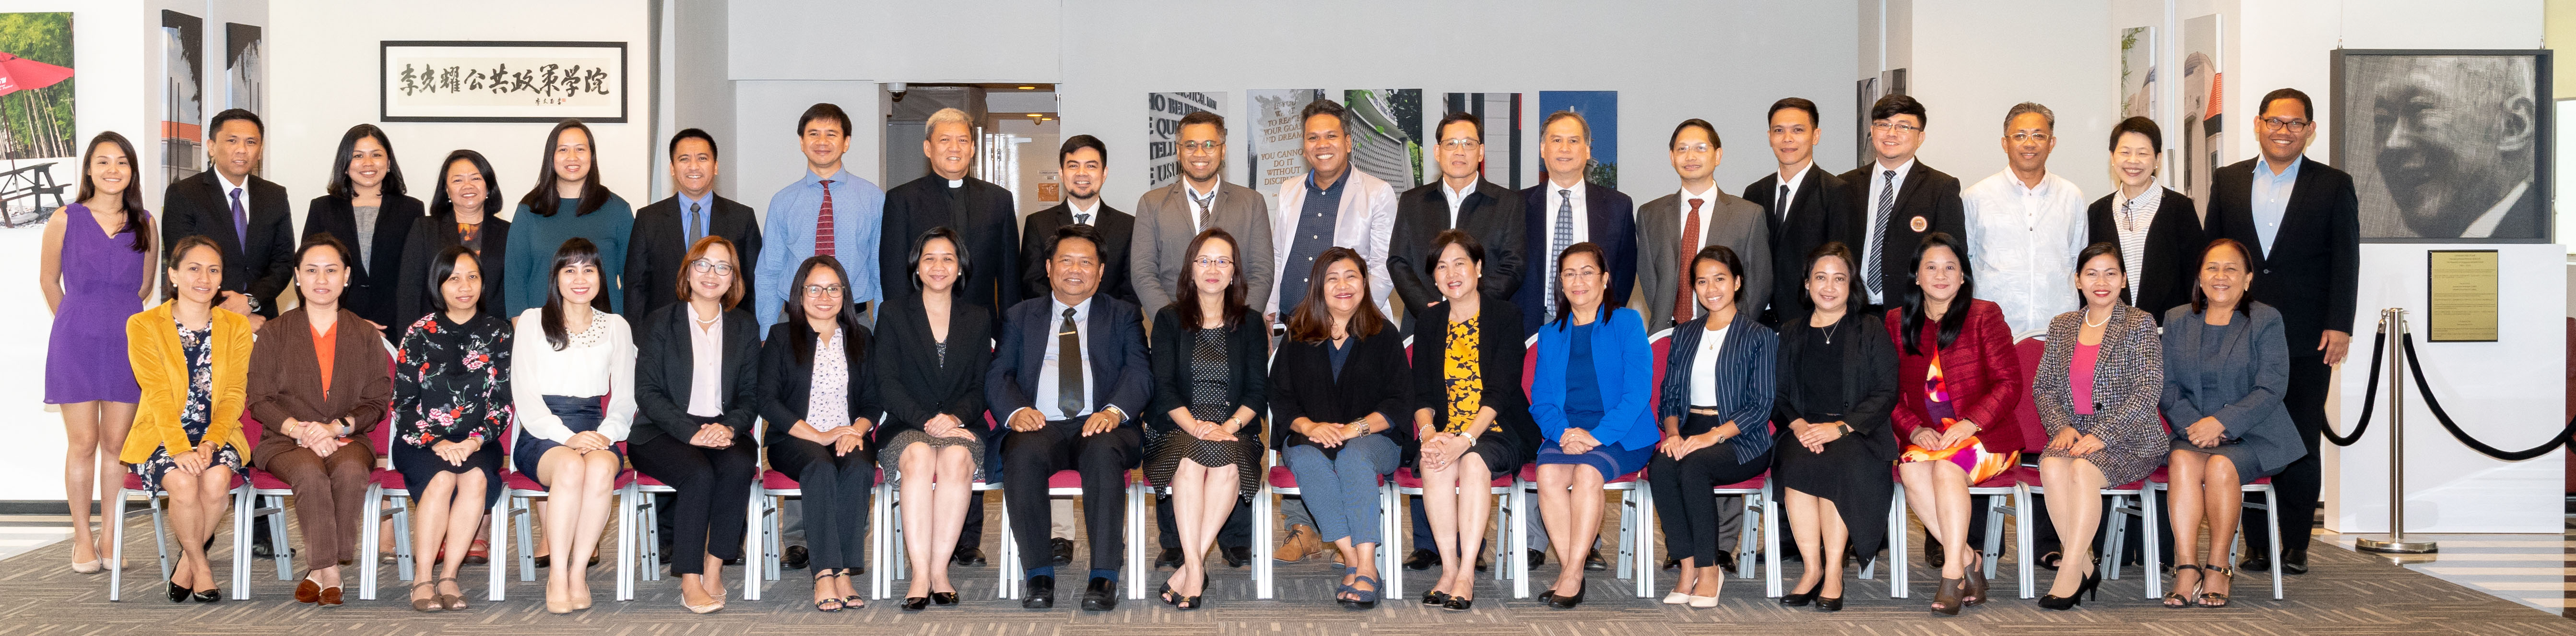 Filipino education leaders attend LKY executive program in Singapore